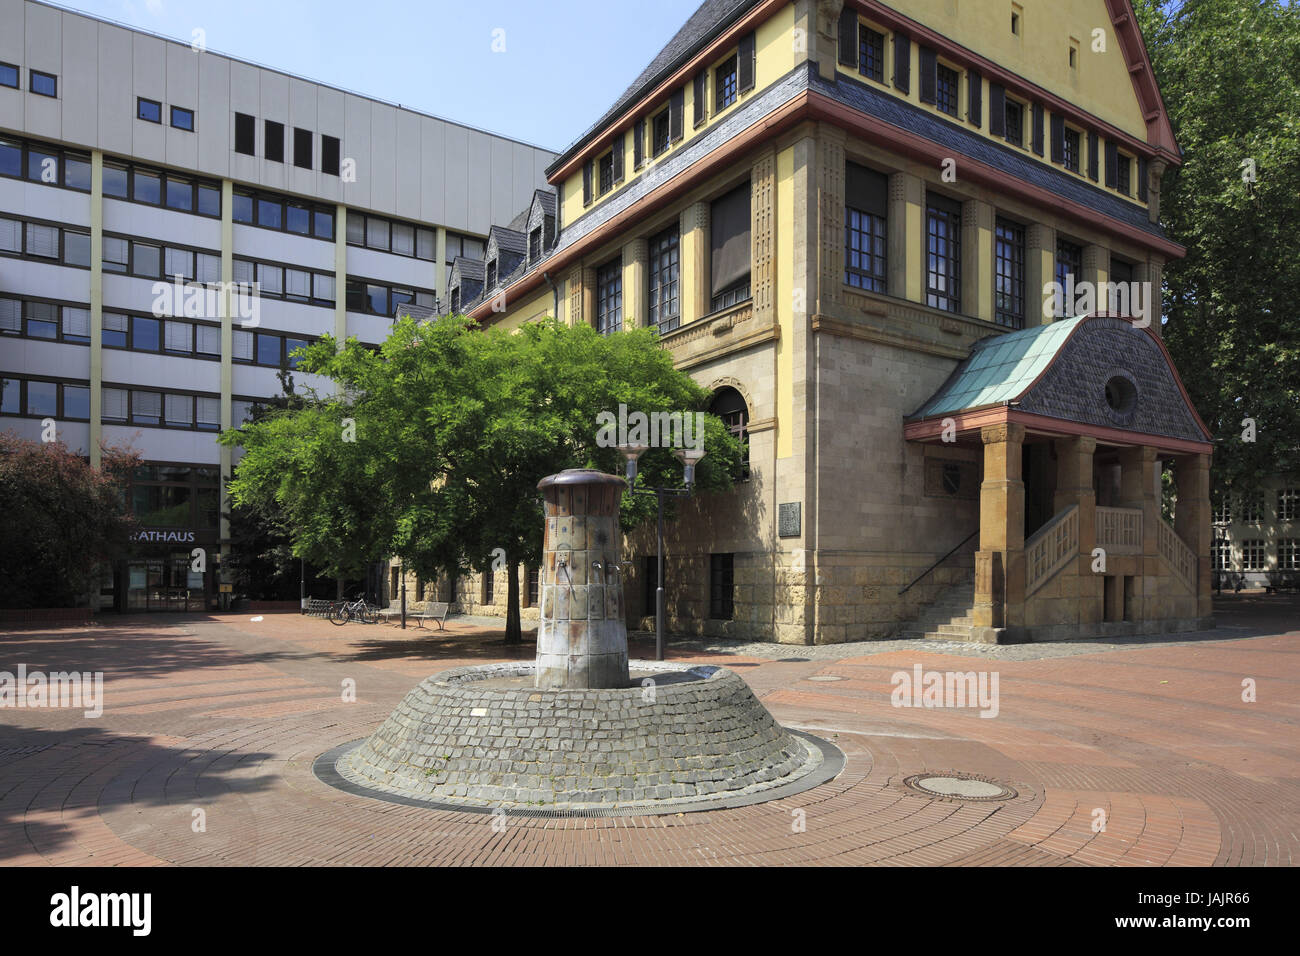 Germany,Cologne bay,cheeky,Ville,nature reserve Rhineland,formerly nature reserve Kottenforst-Ville,North Rhine-Westphalia,Johann Schmitz square,new city hall,old city hall,market well, Stock Photo